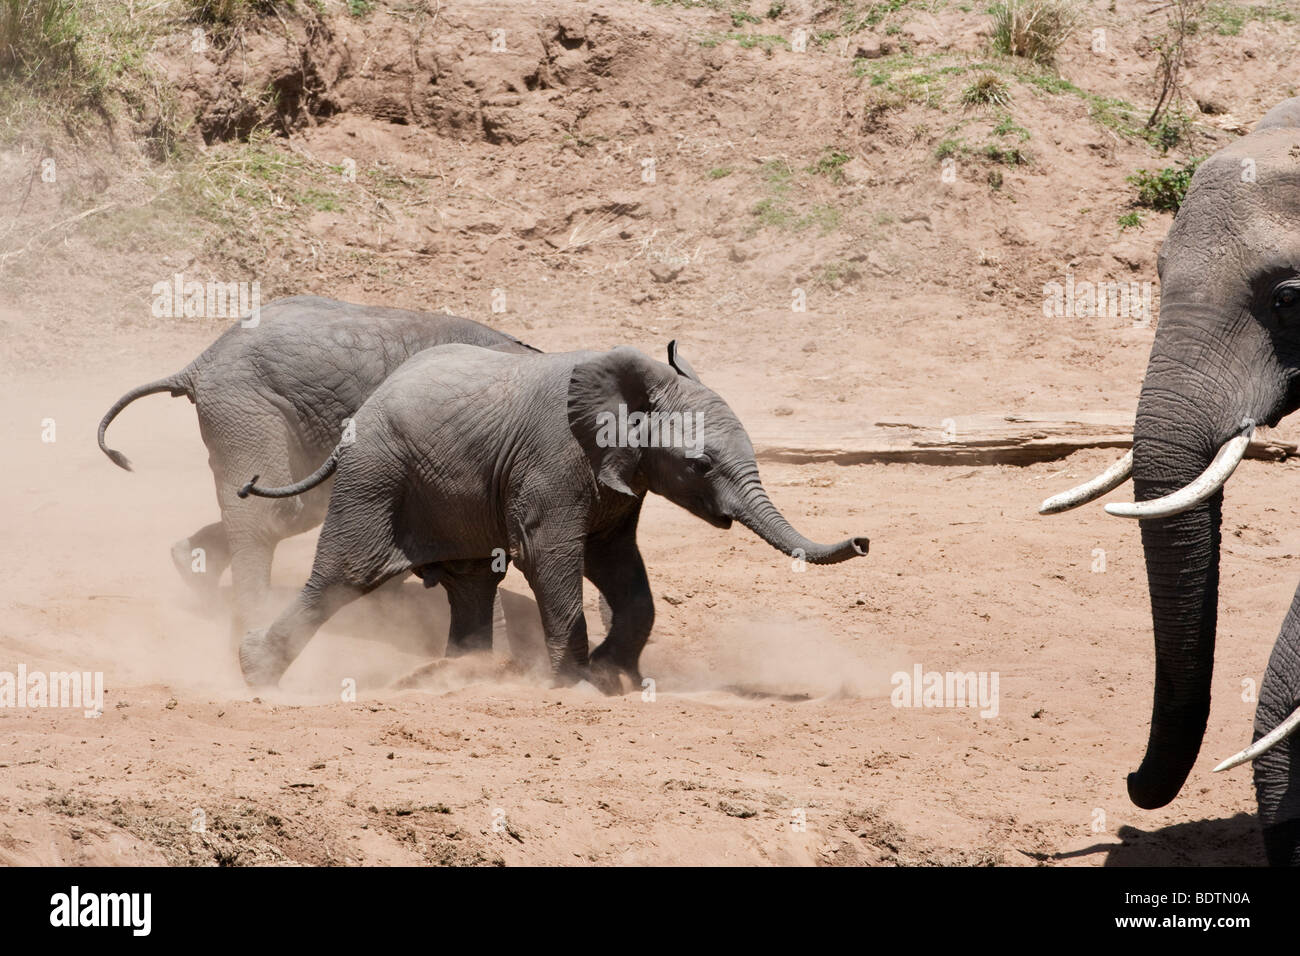 Adorable cute funny twin tiny baby African elephants excited running, stirring up dust, watched by adults at riverbank in Masai Mara Kenya Stock Photo